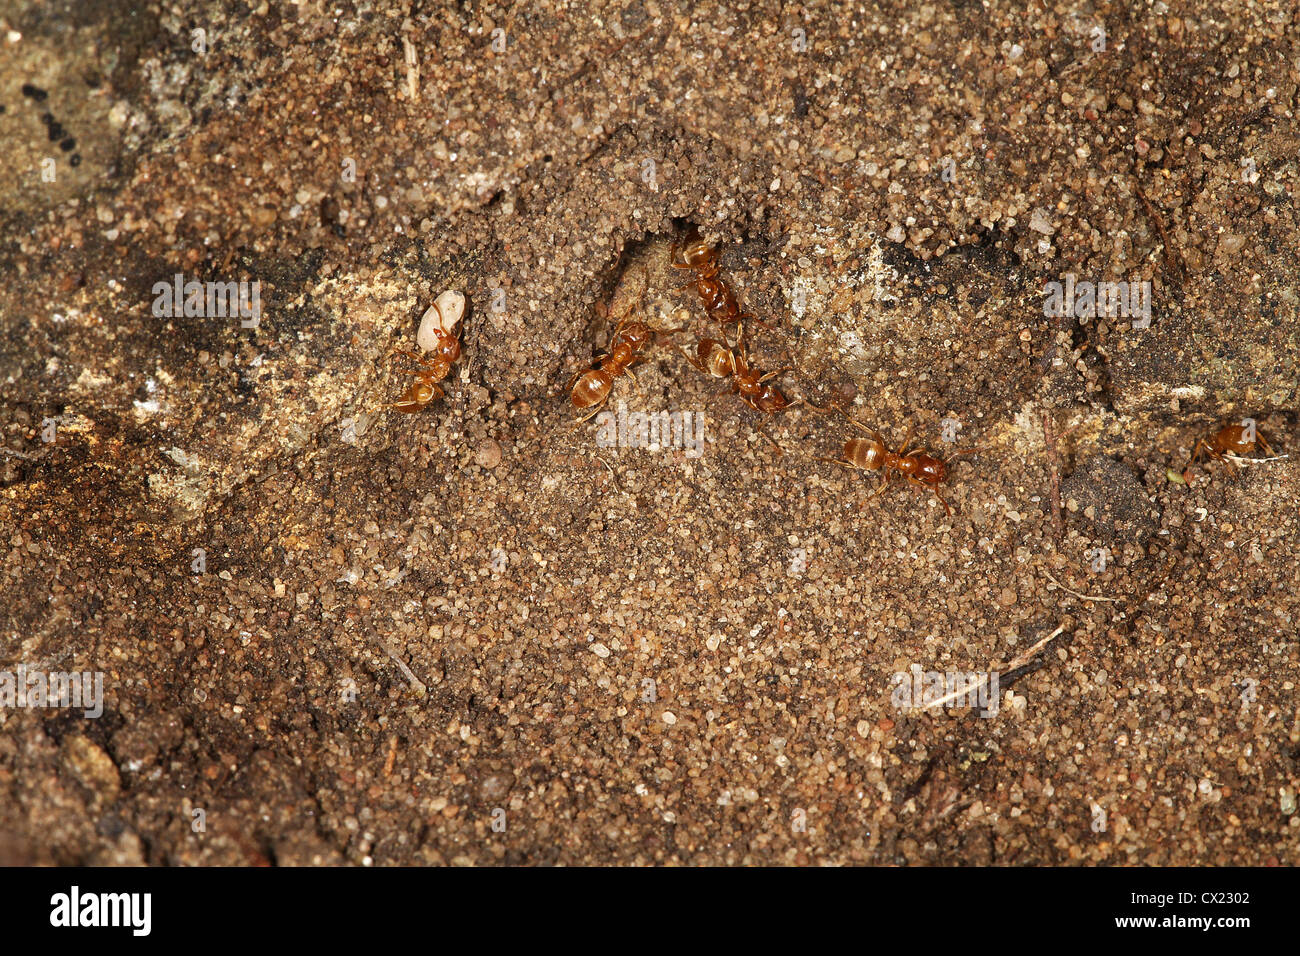 Red Ants. Stock Photo